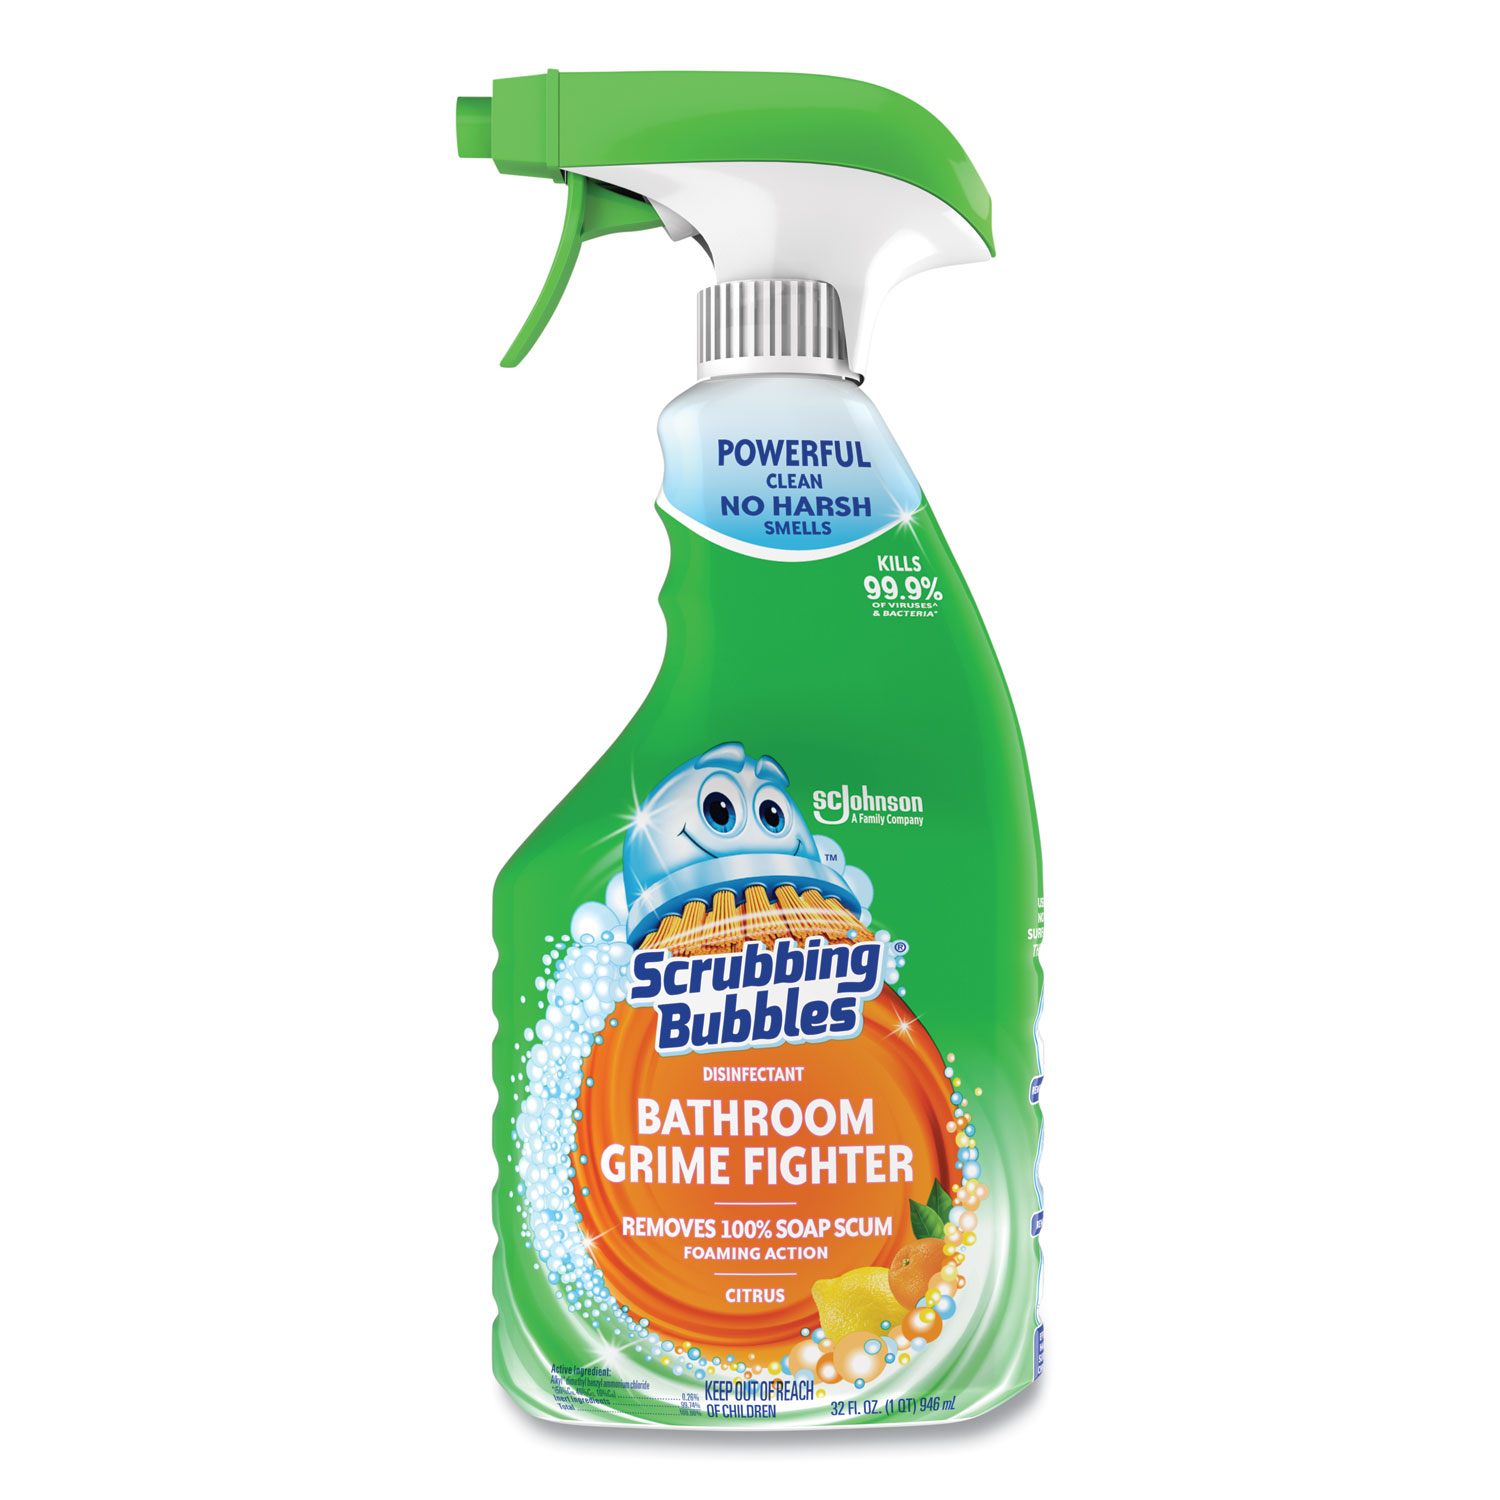 32 Oz Spray Bottle for Cleaning